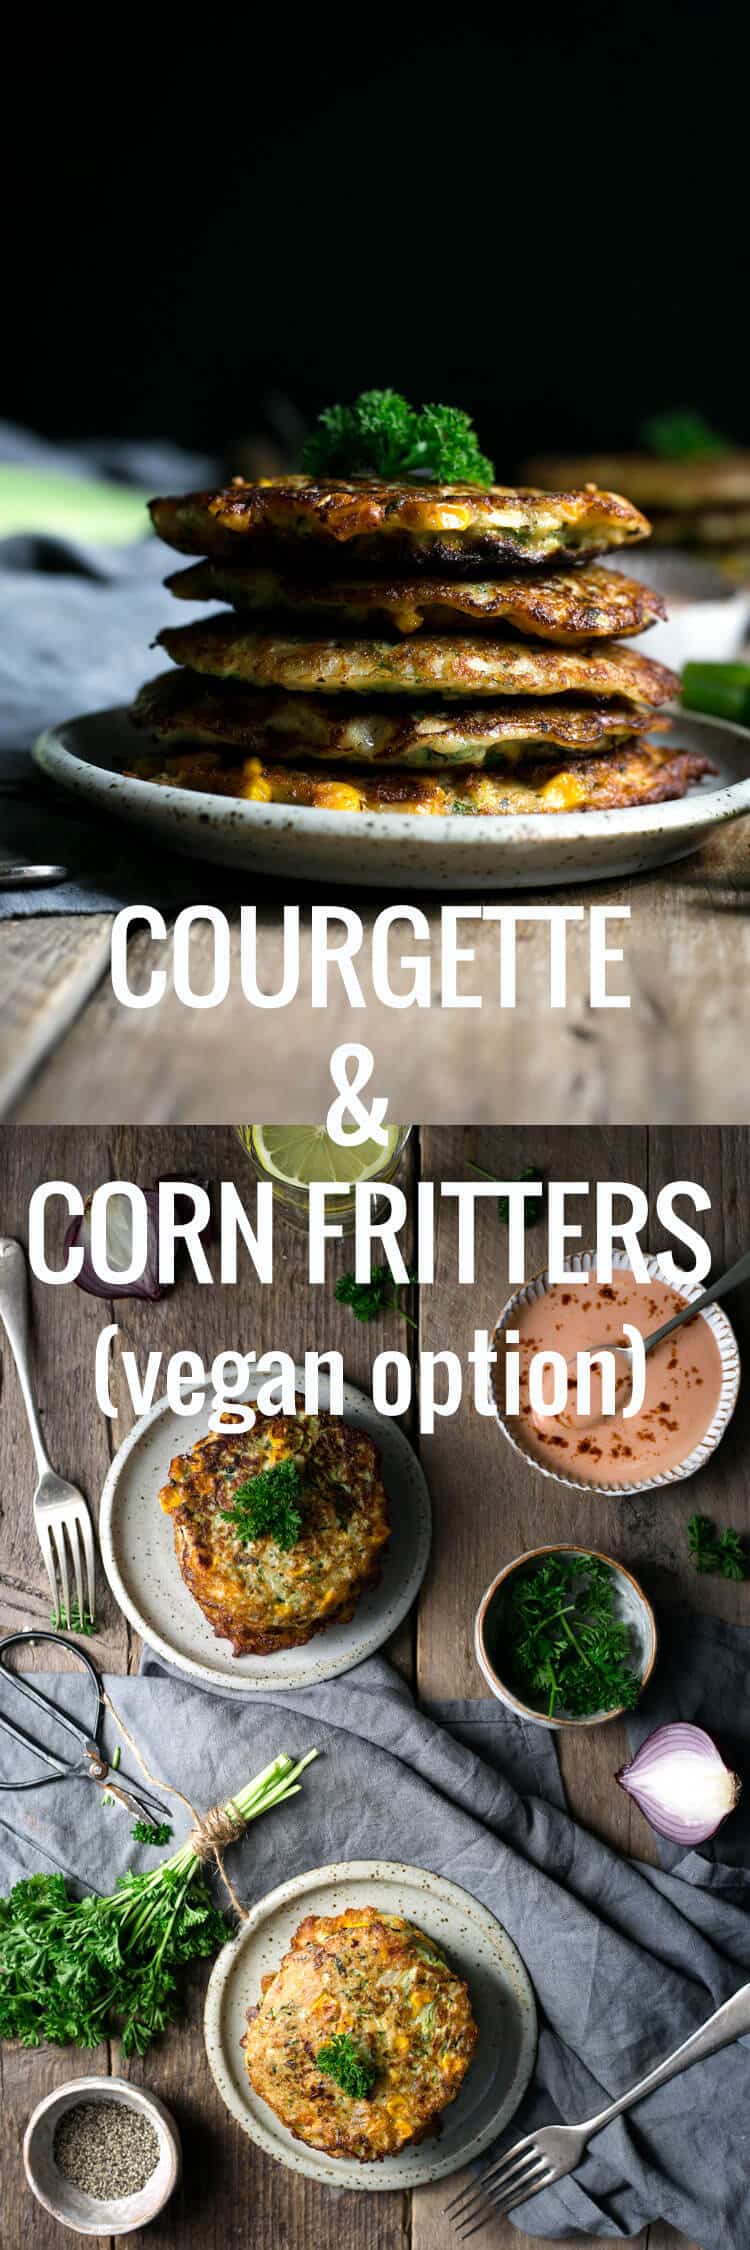 Delicious and easy recipe for courgette and corn fritters | via @annabanana.co